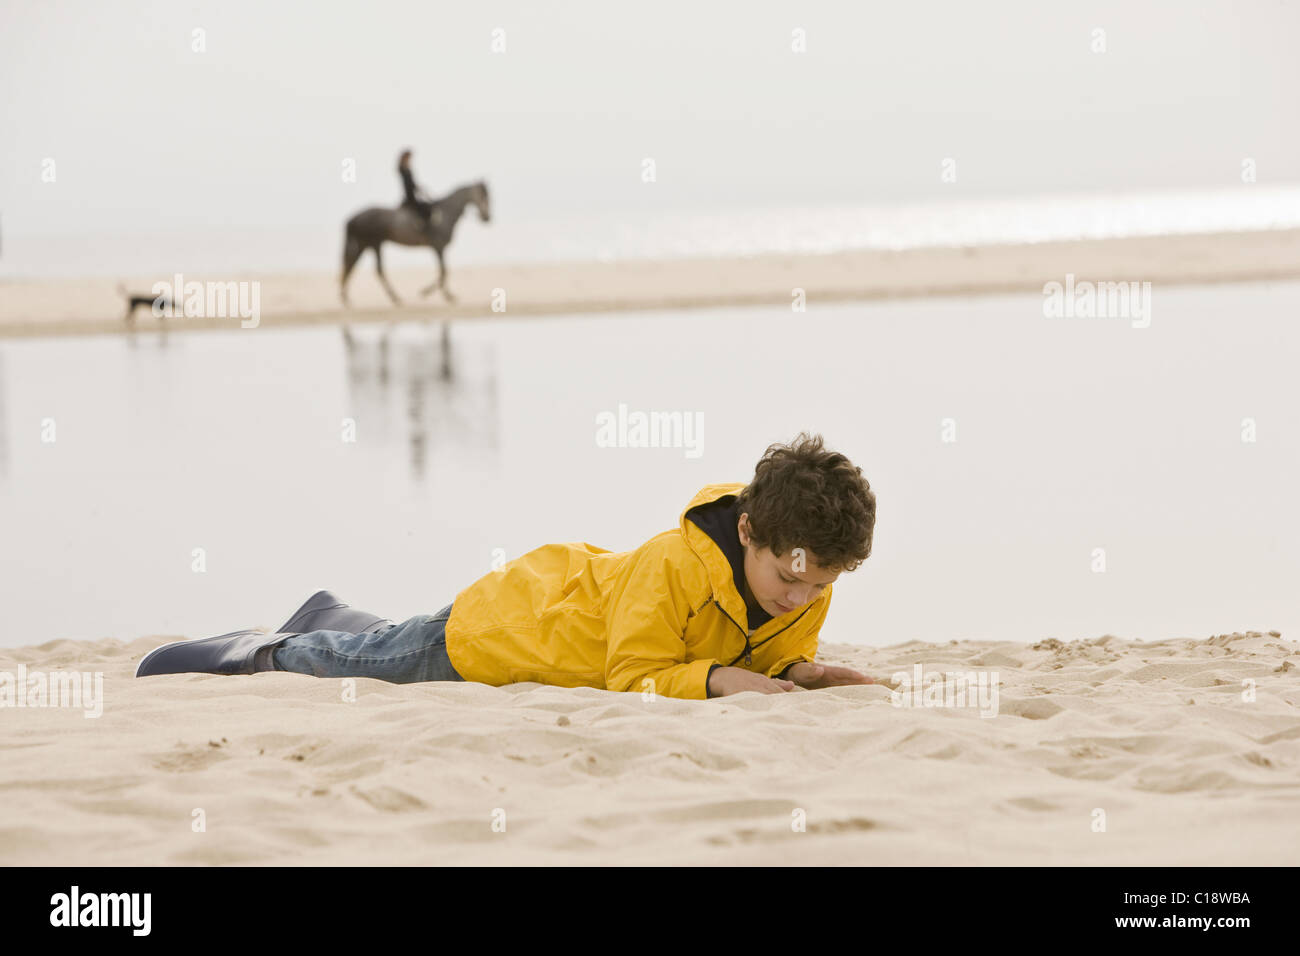 Young boy lying on sand at beach Banque D'Images